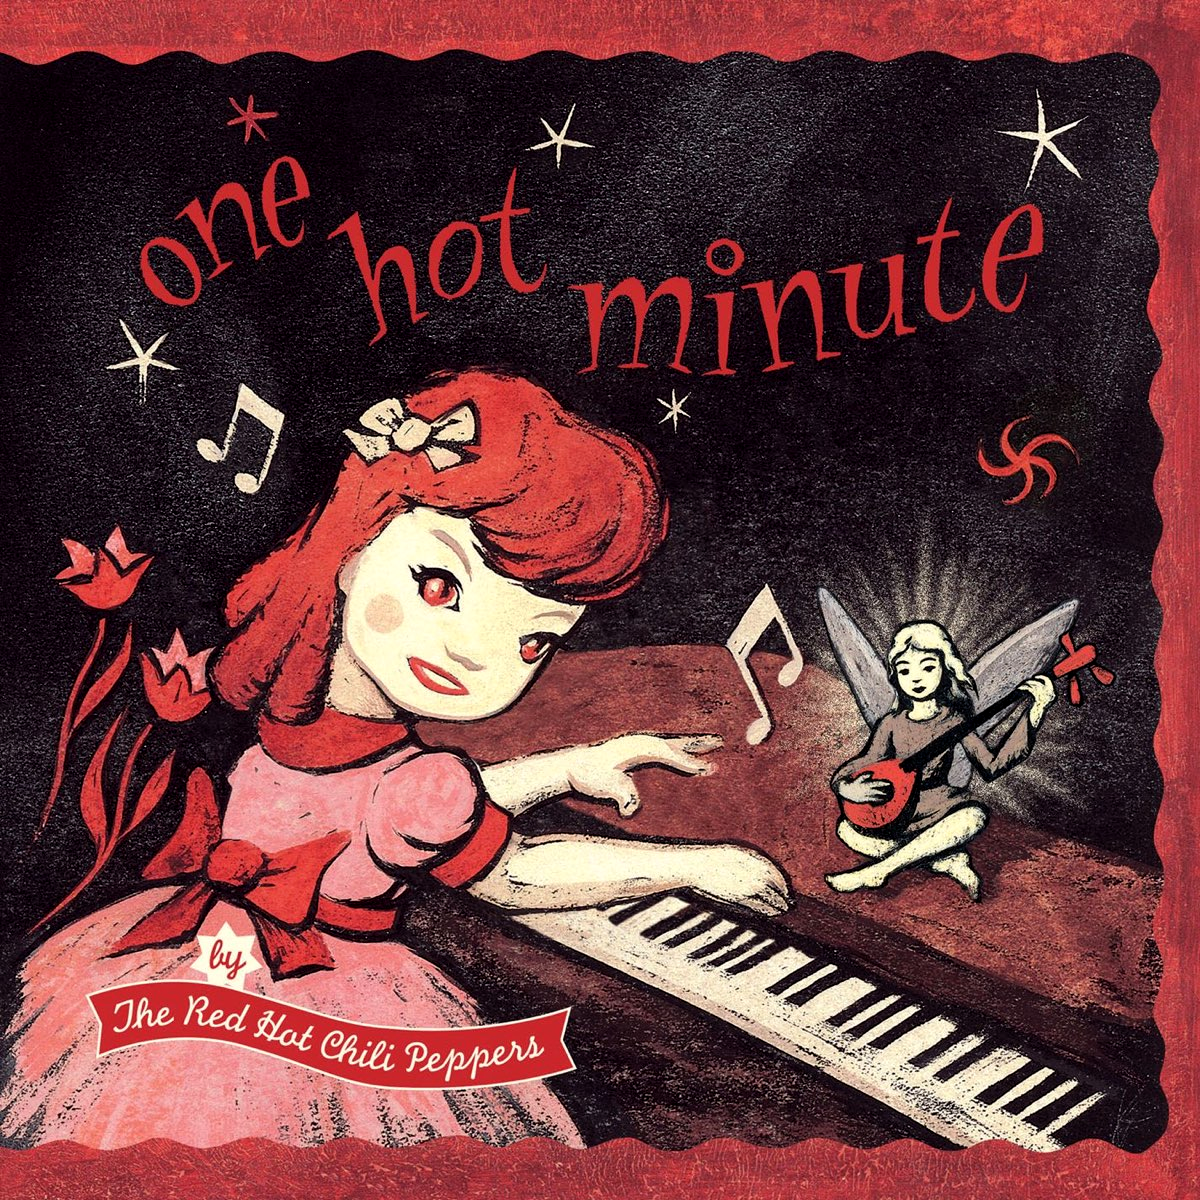 Red Hot Chili Peppers-One Hot Minute-CD-FLAC-1995-JLM